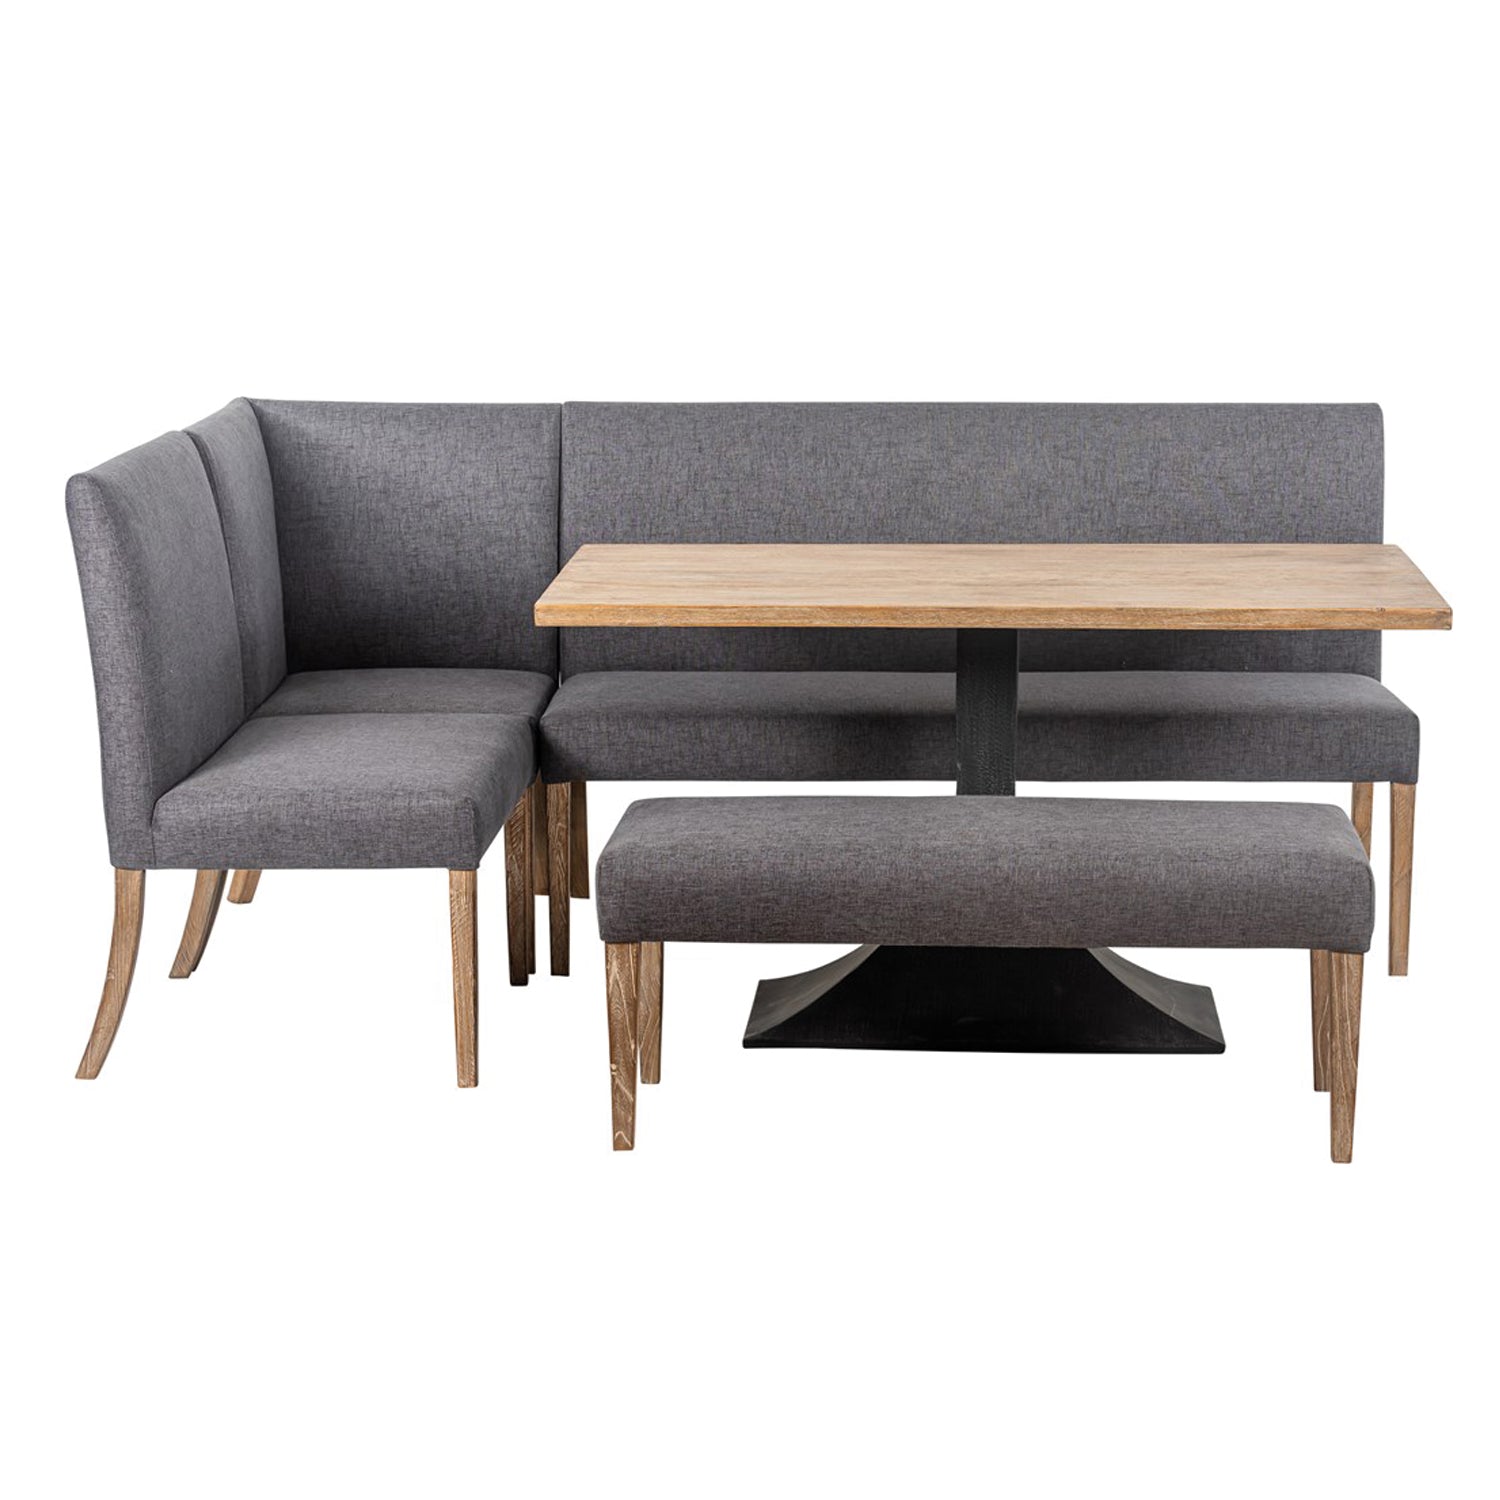 Table & Bench With Corner Section - Eastwood